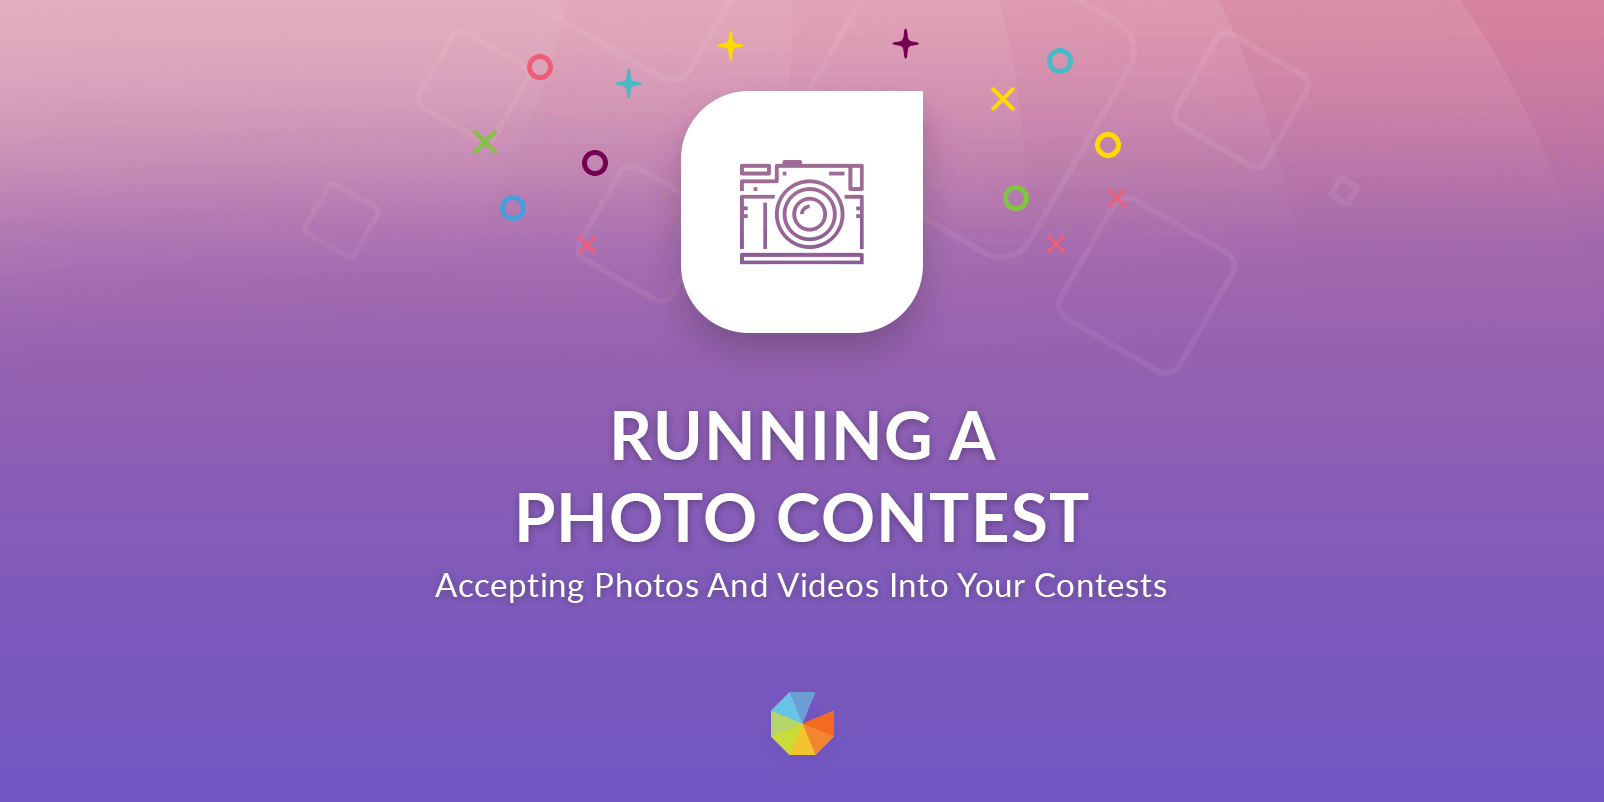 How to Run a Photo Contest with Gleam